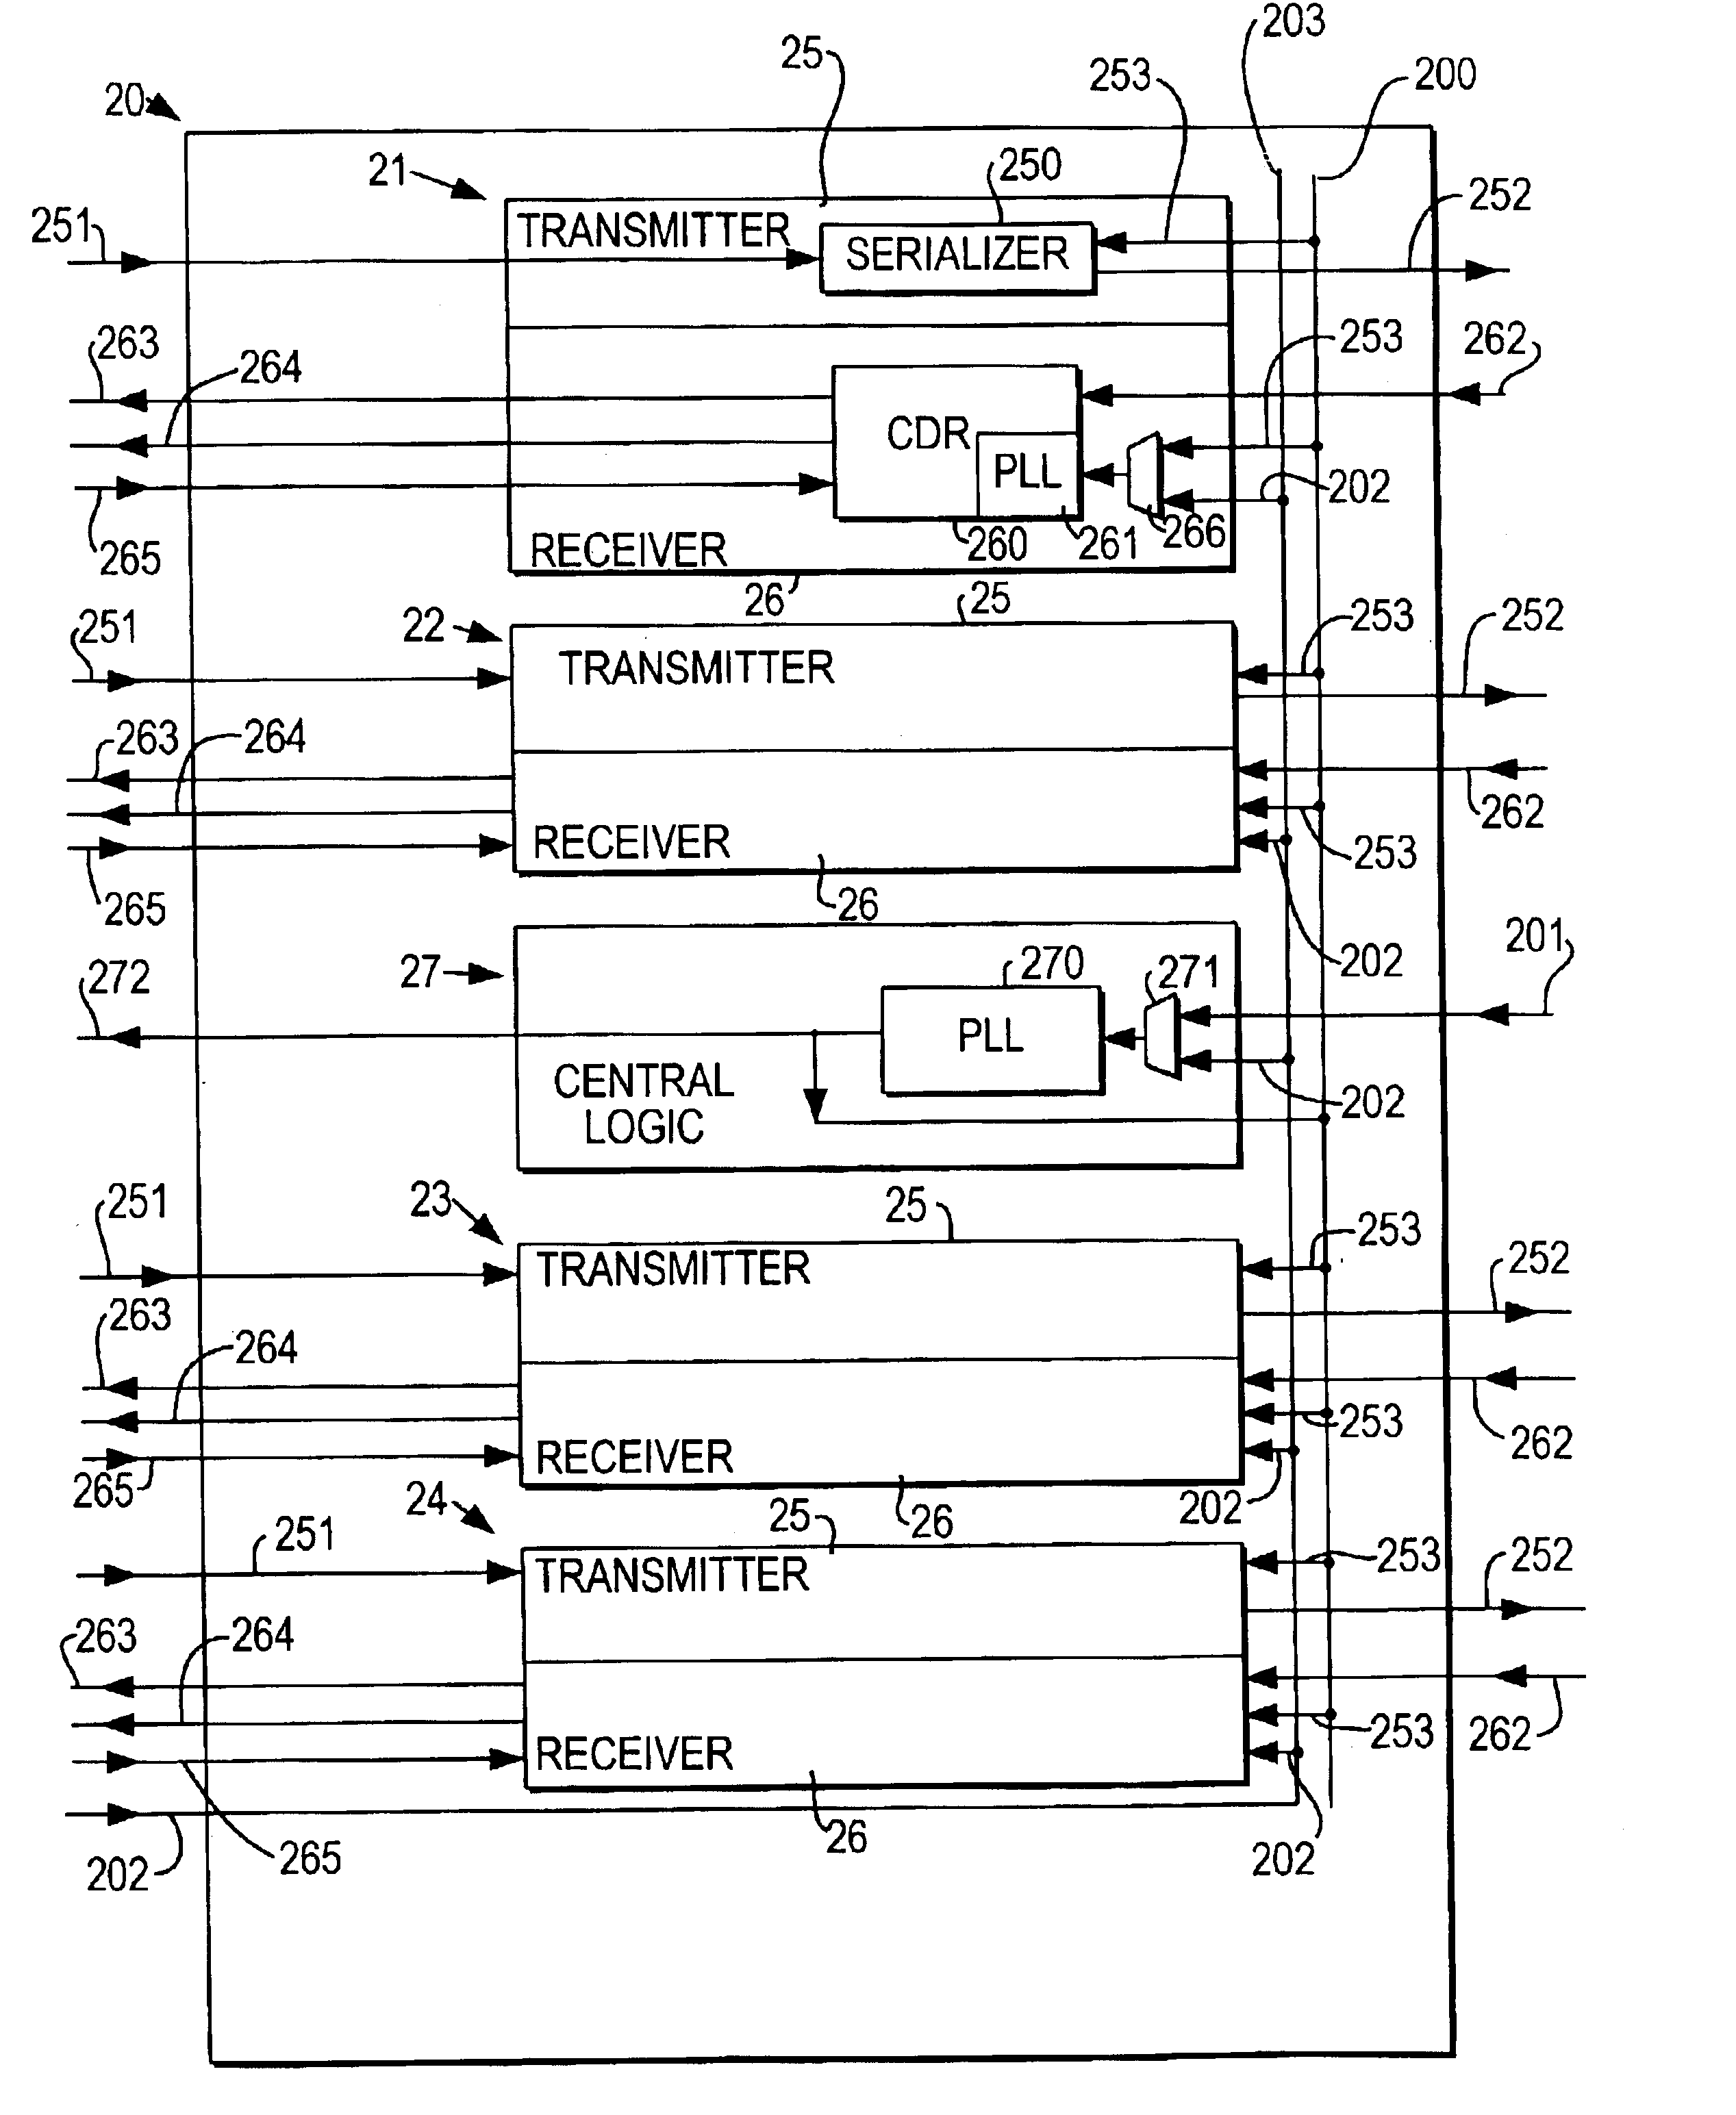 Programmable logic device serial interface having dual-use phase-locked loop circuitry